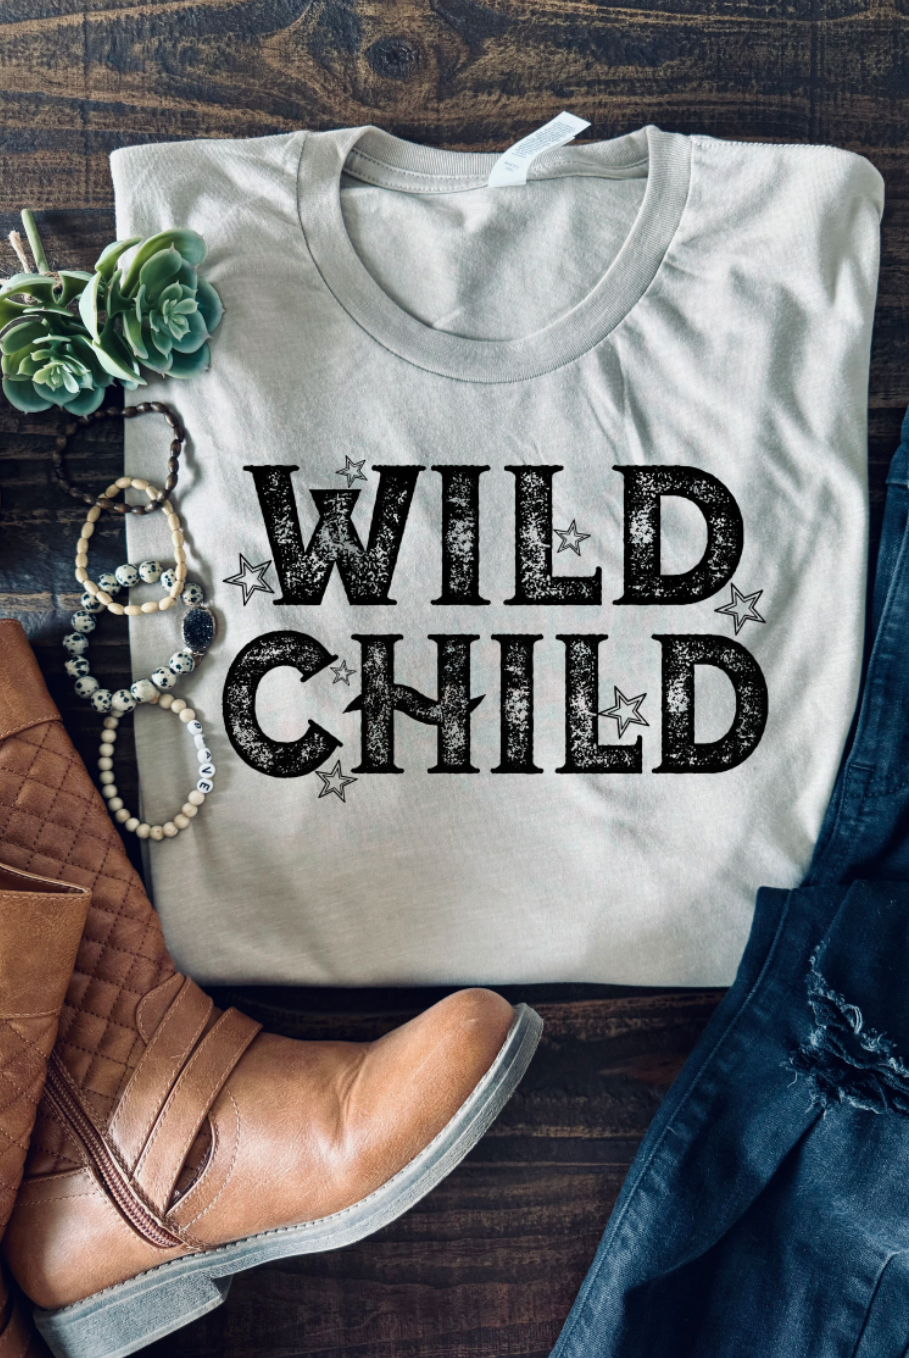 Wild Child Vintage Country Western Unisex Tshirt on Bella and Canvas Shirt in Tan.